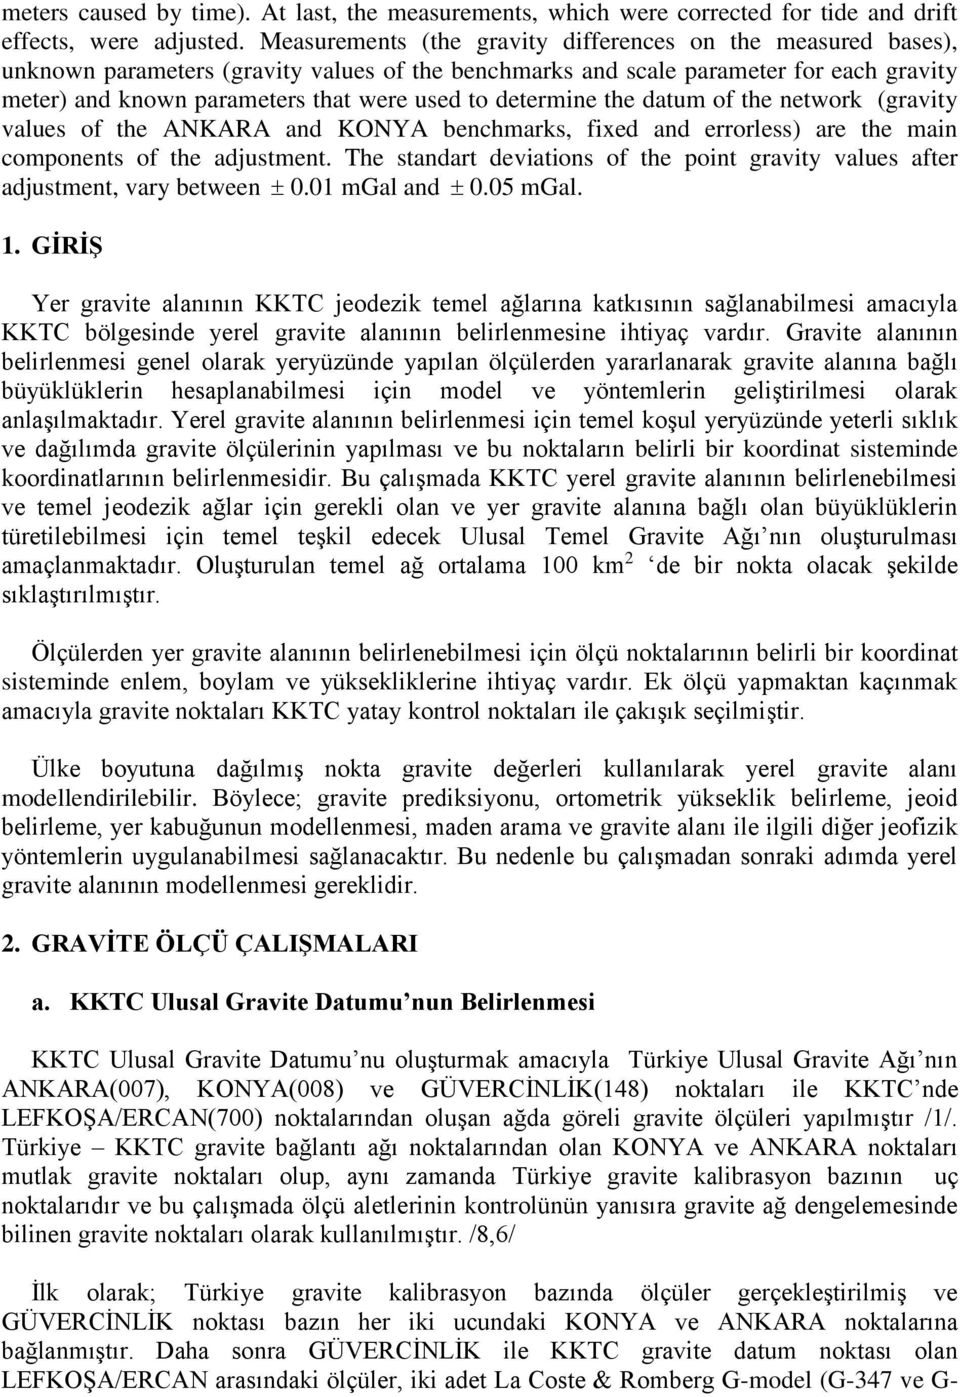 determine the datum of the network (gravity values of the ANKARA and KONYA benchmarks, fixed and errorless) are the main components of the adustment.